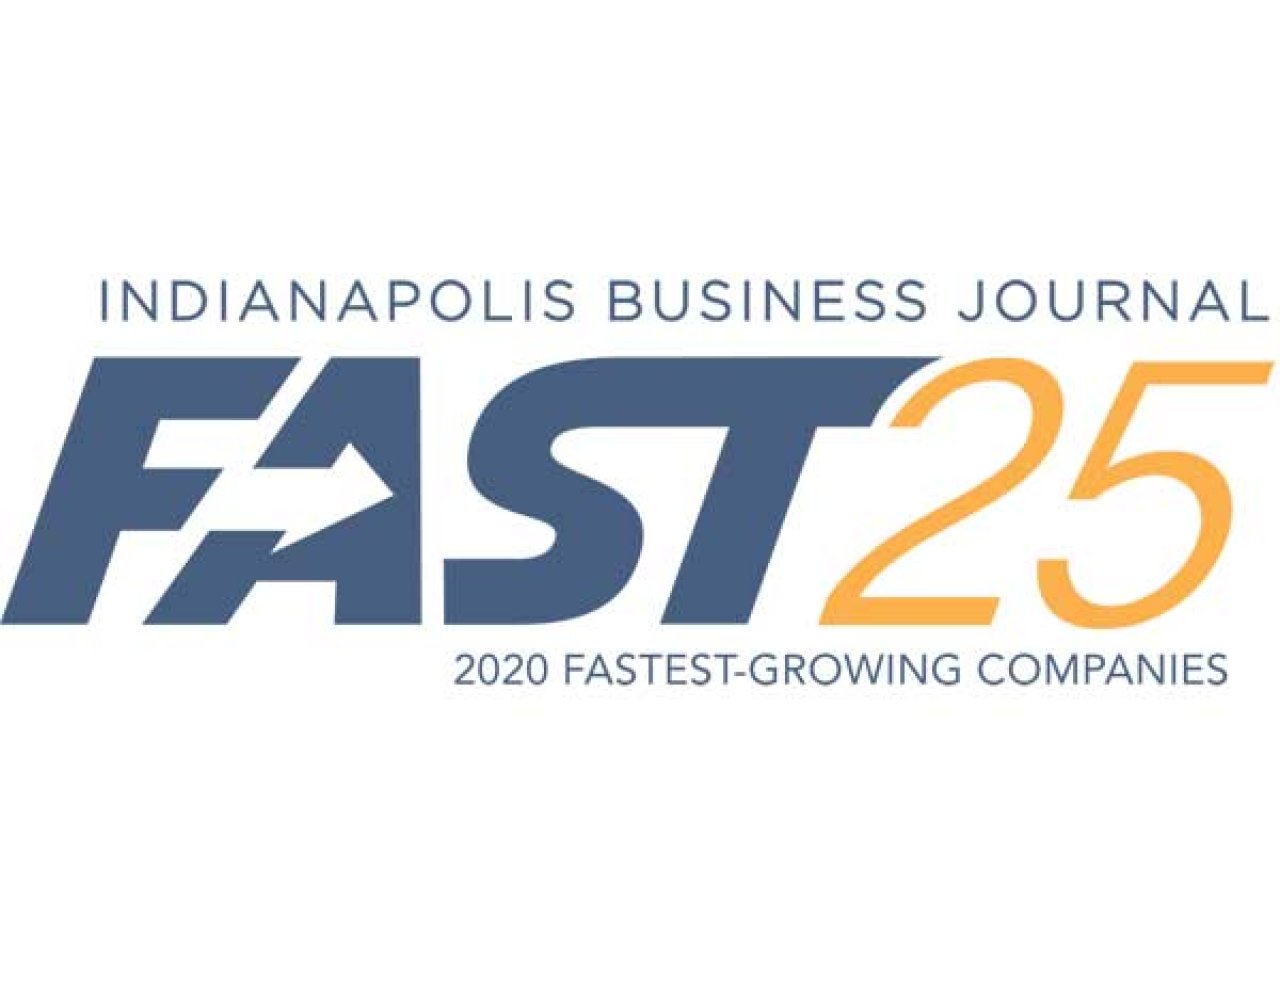 Indianapolis Business Journal Fast 25 2020 Fastest Growing Companies.